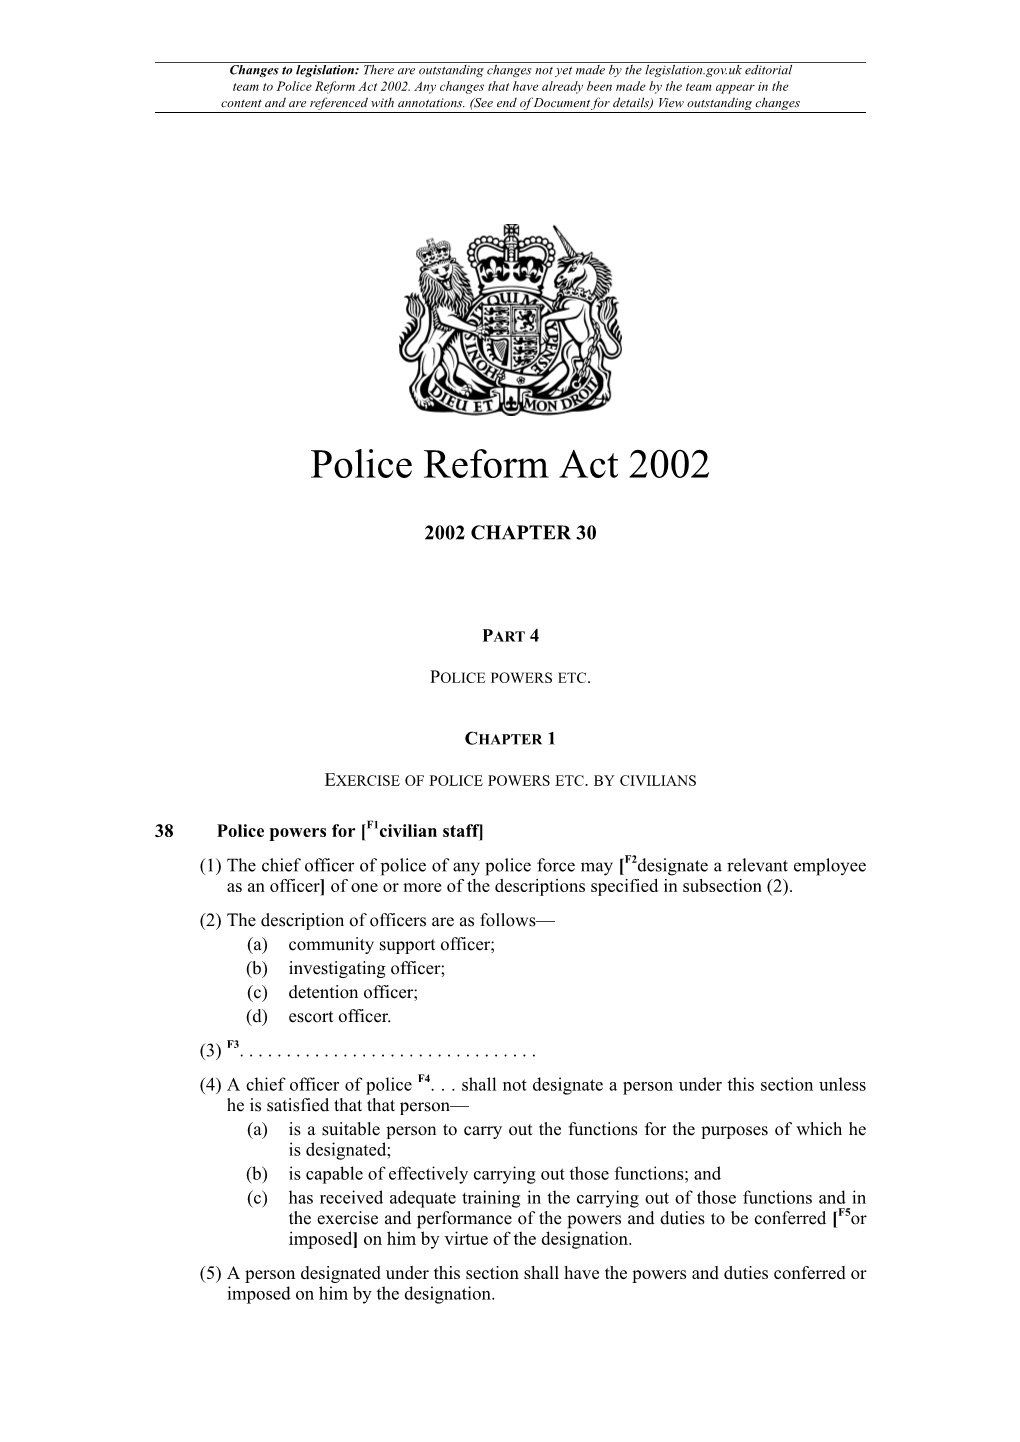 Police Reform Act 2002